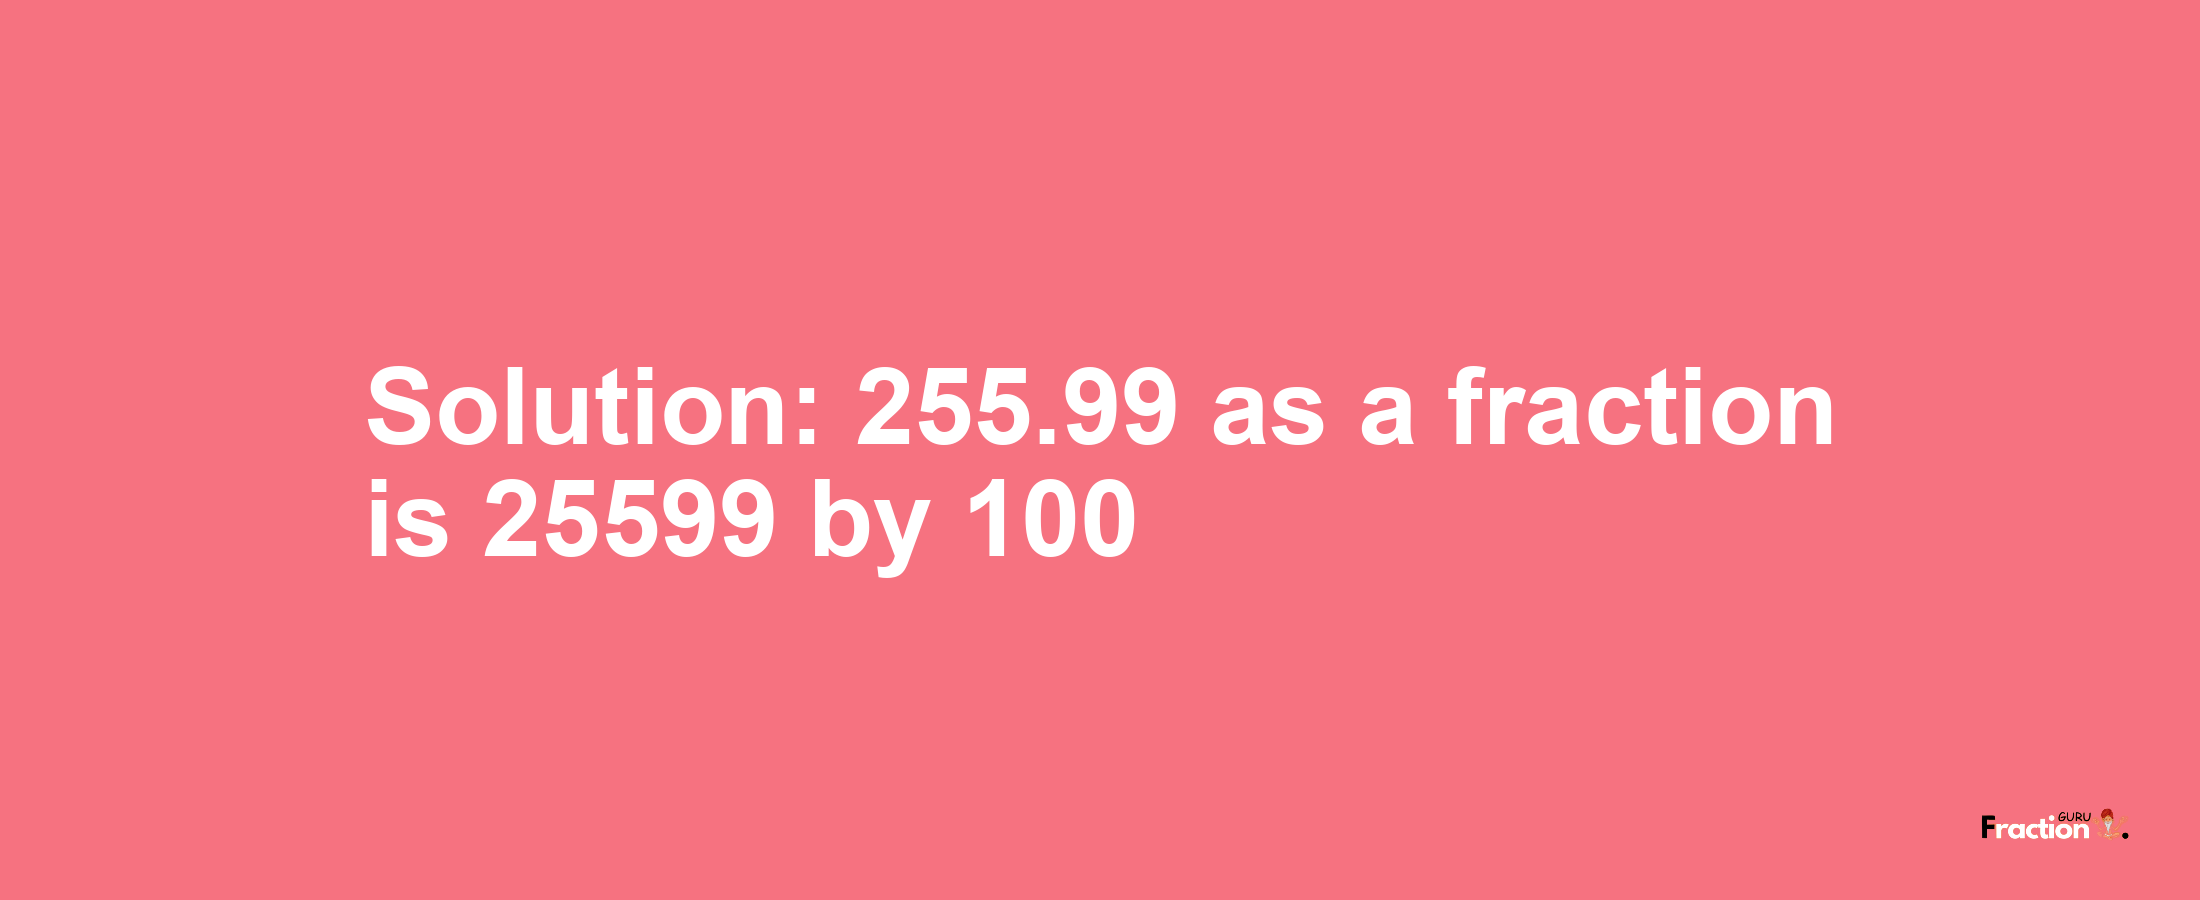 Solution:255.99 as a fraction is 25599/100